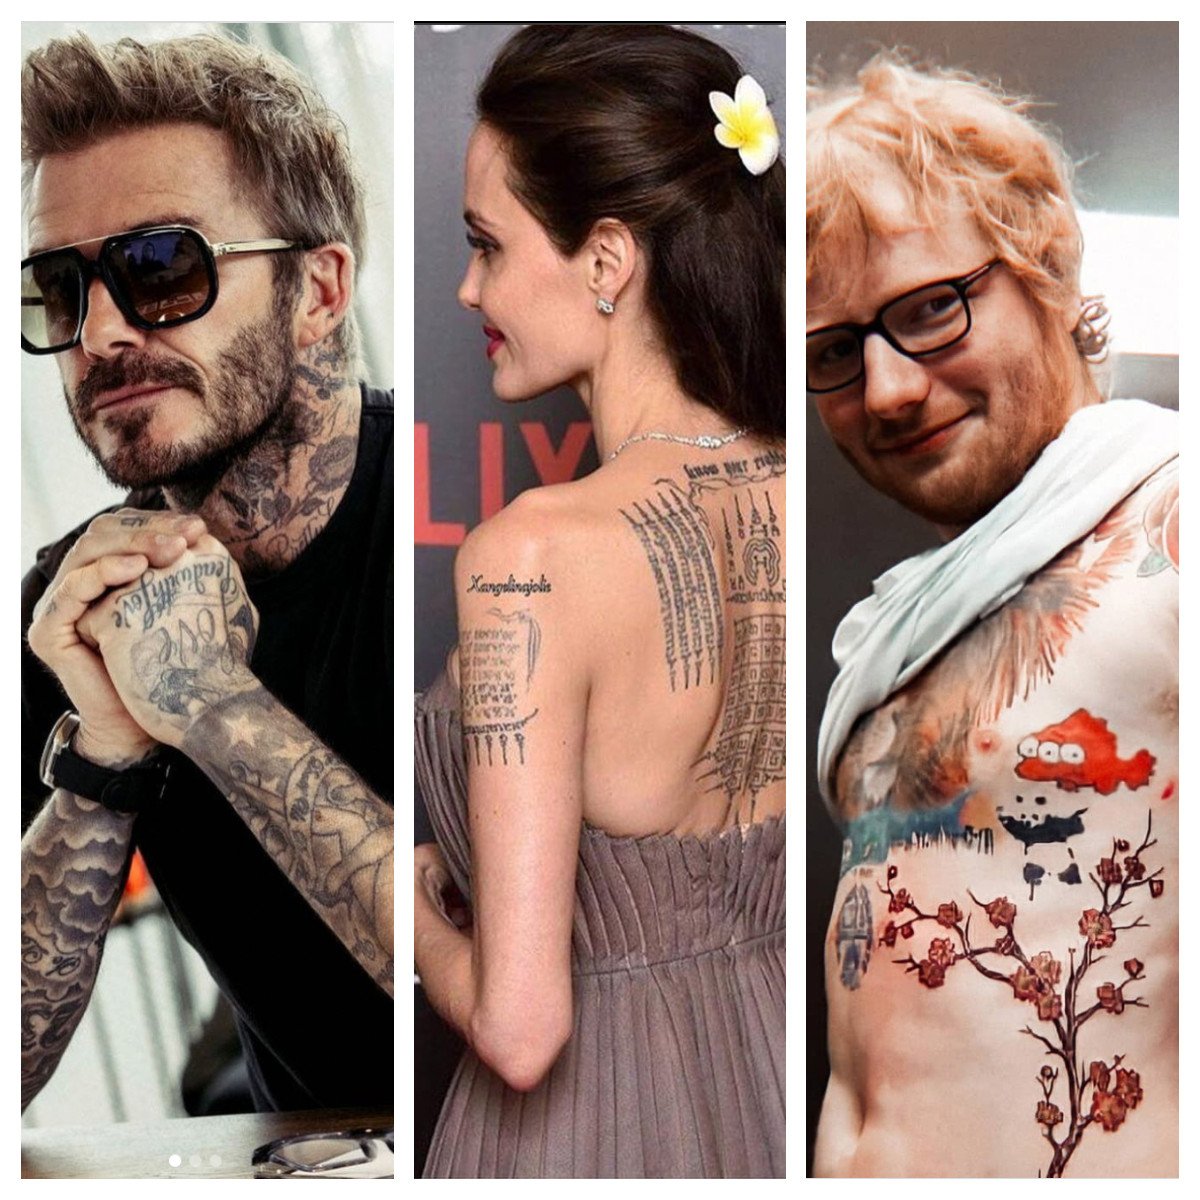 Tattoos are an important part of David Beckham, Angelina Jolie and Ed Sheeran’s lives. Photos: @_Beckham_75, @thequeenangiejolie, @sheerangalway/Instagram